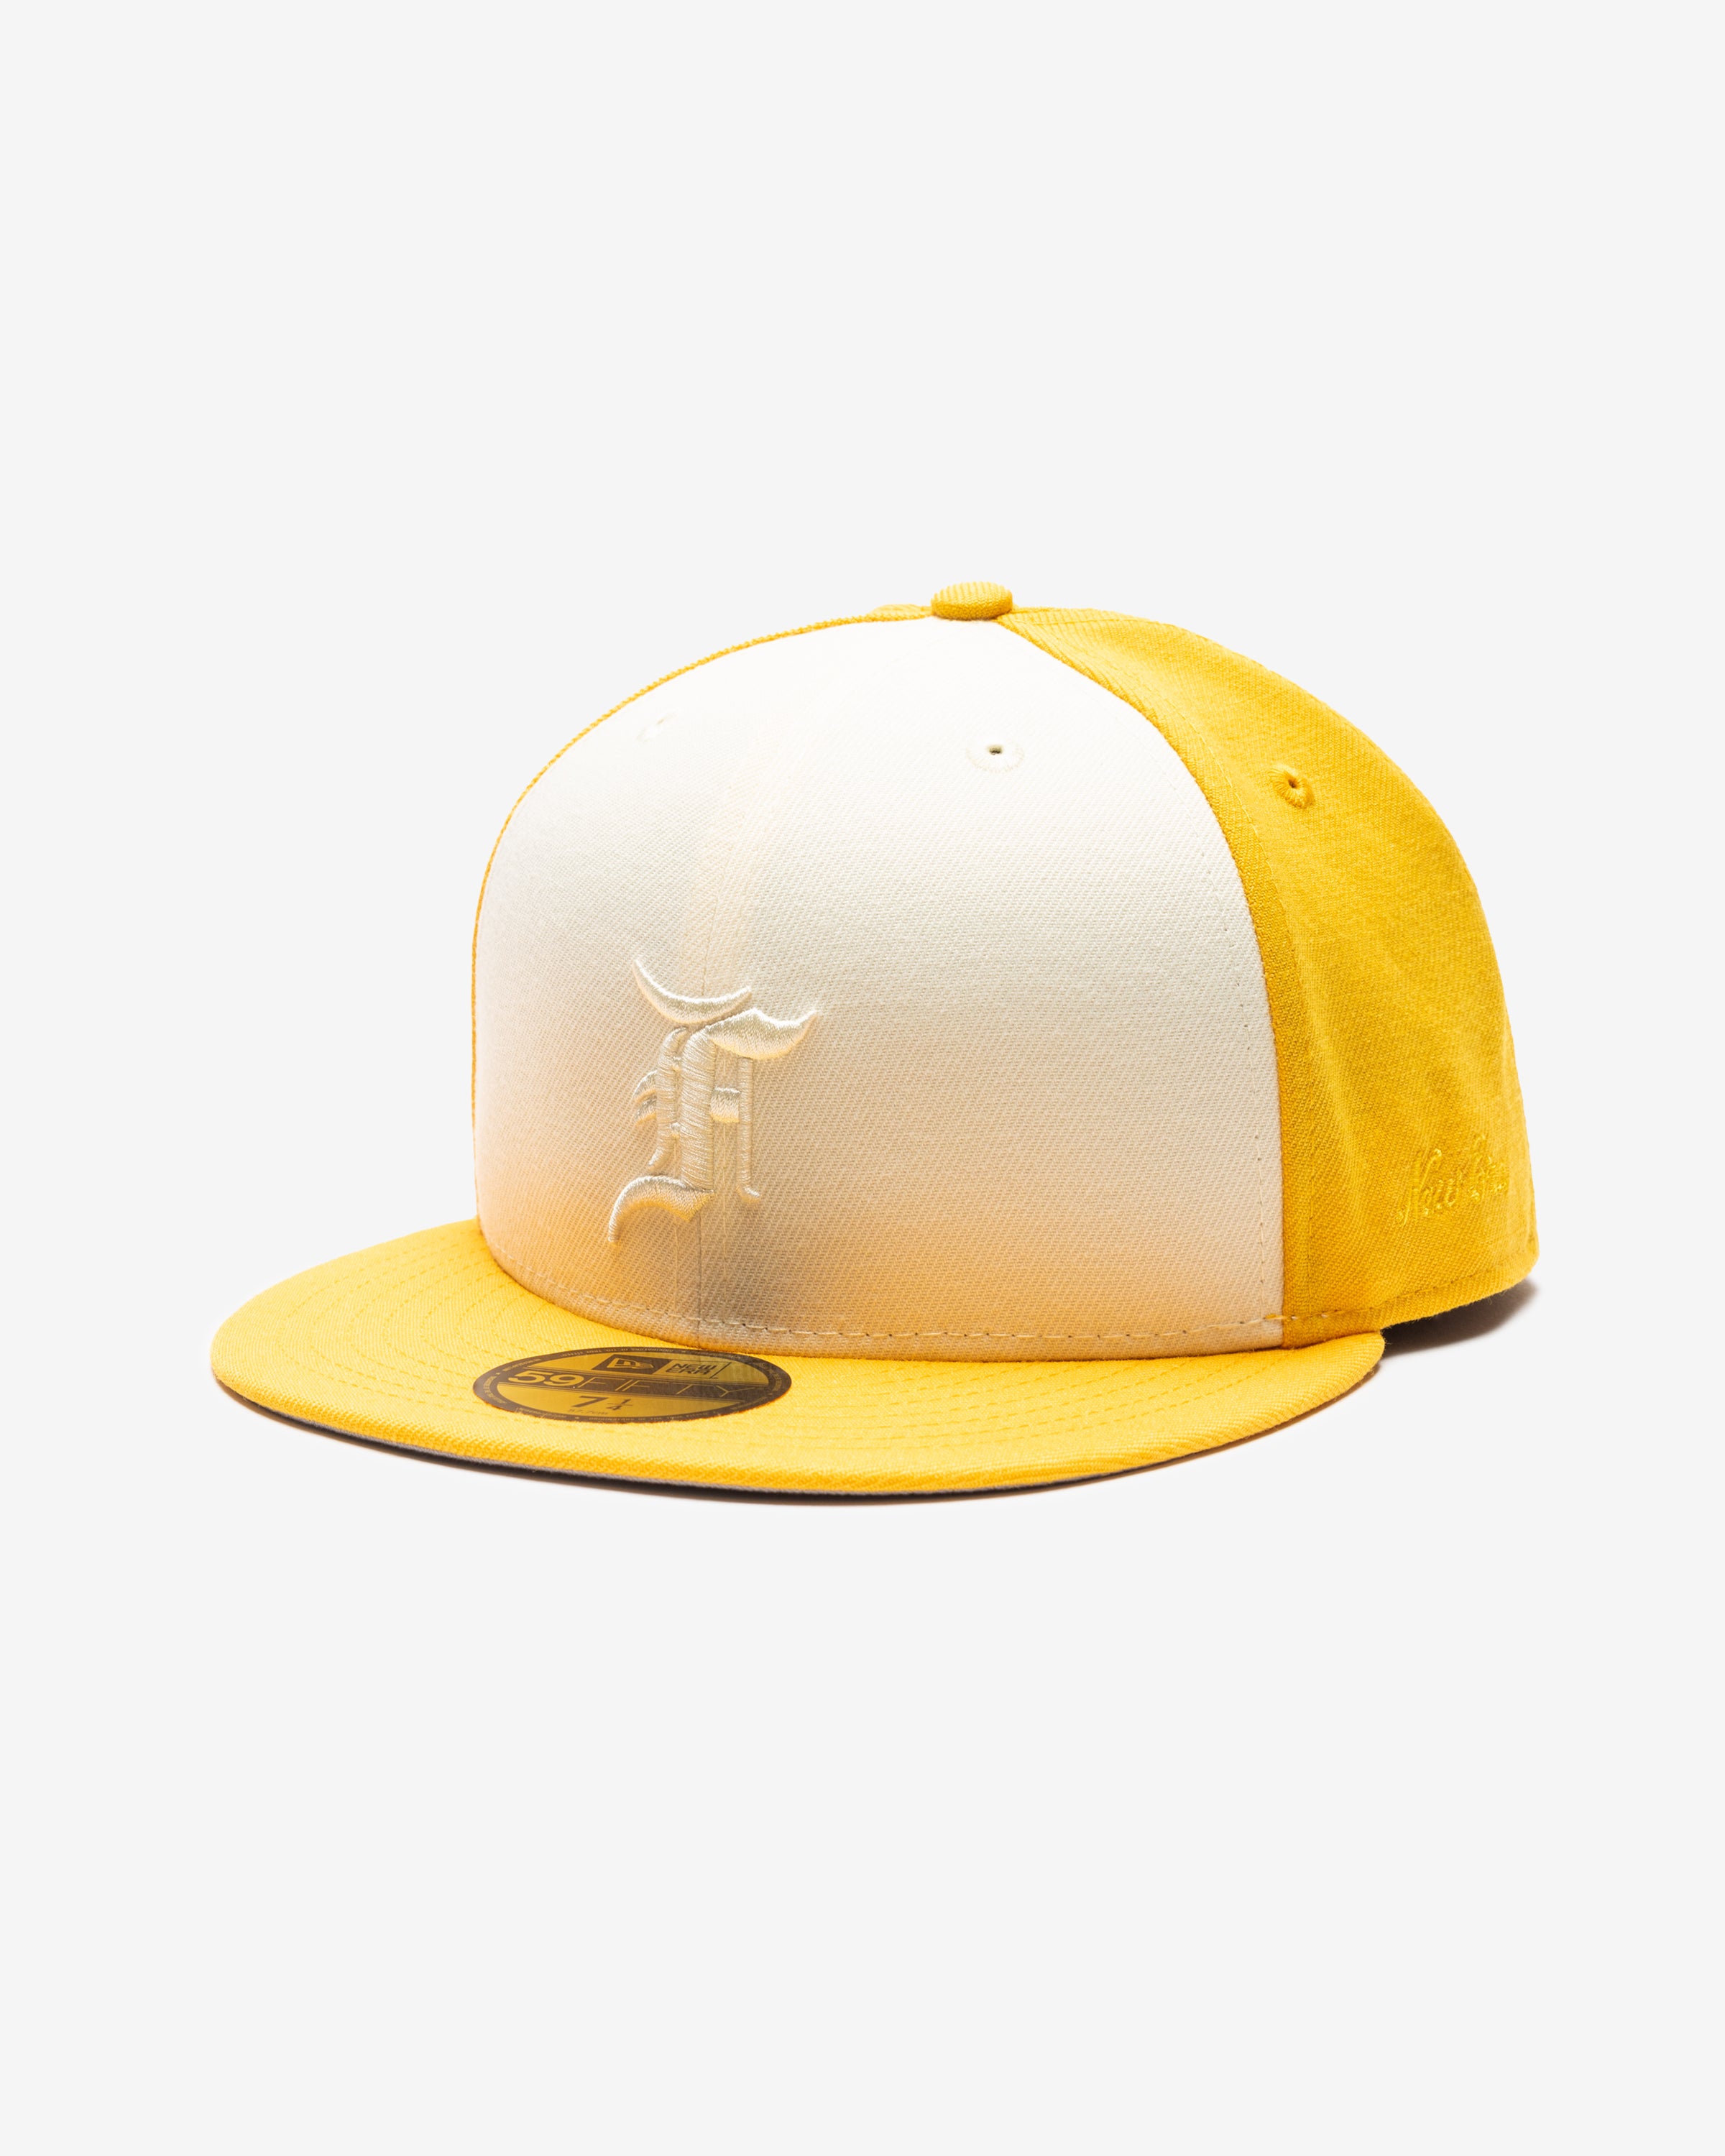 NEW ERA X FEAR OF GOD 59FIFTY FITTED